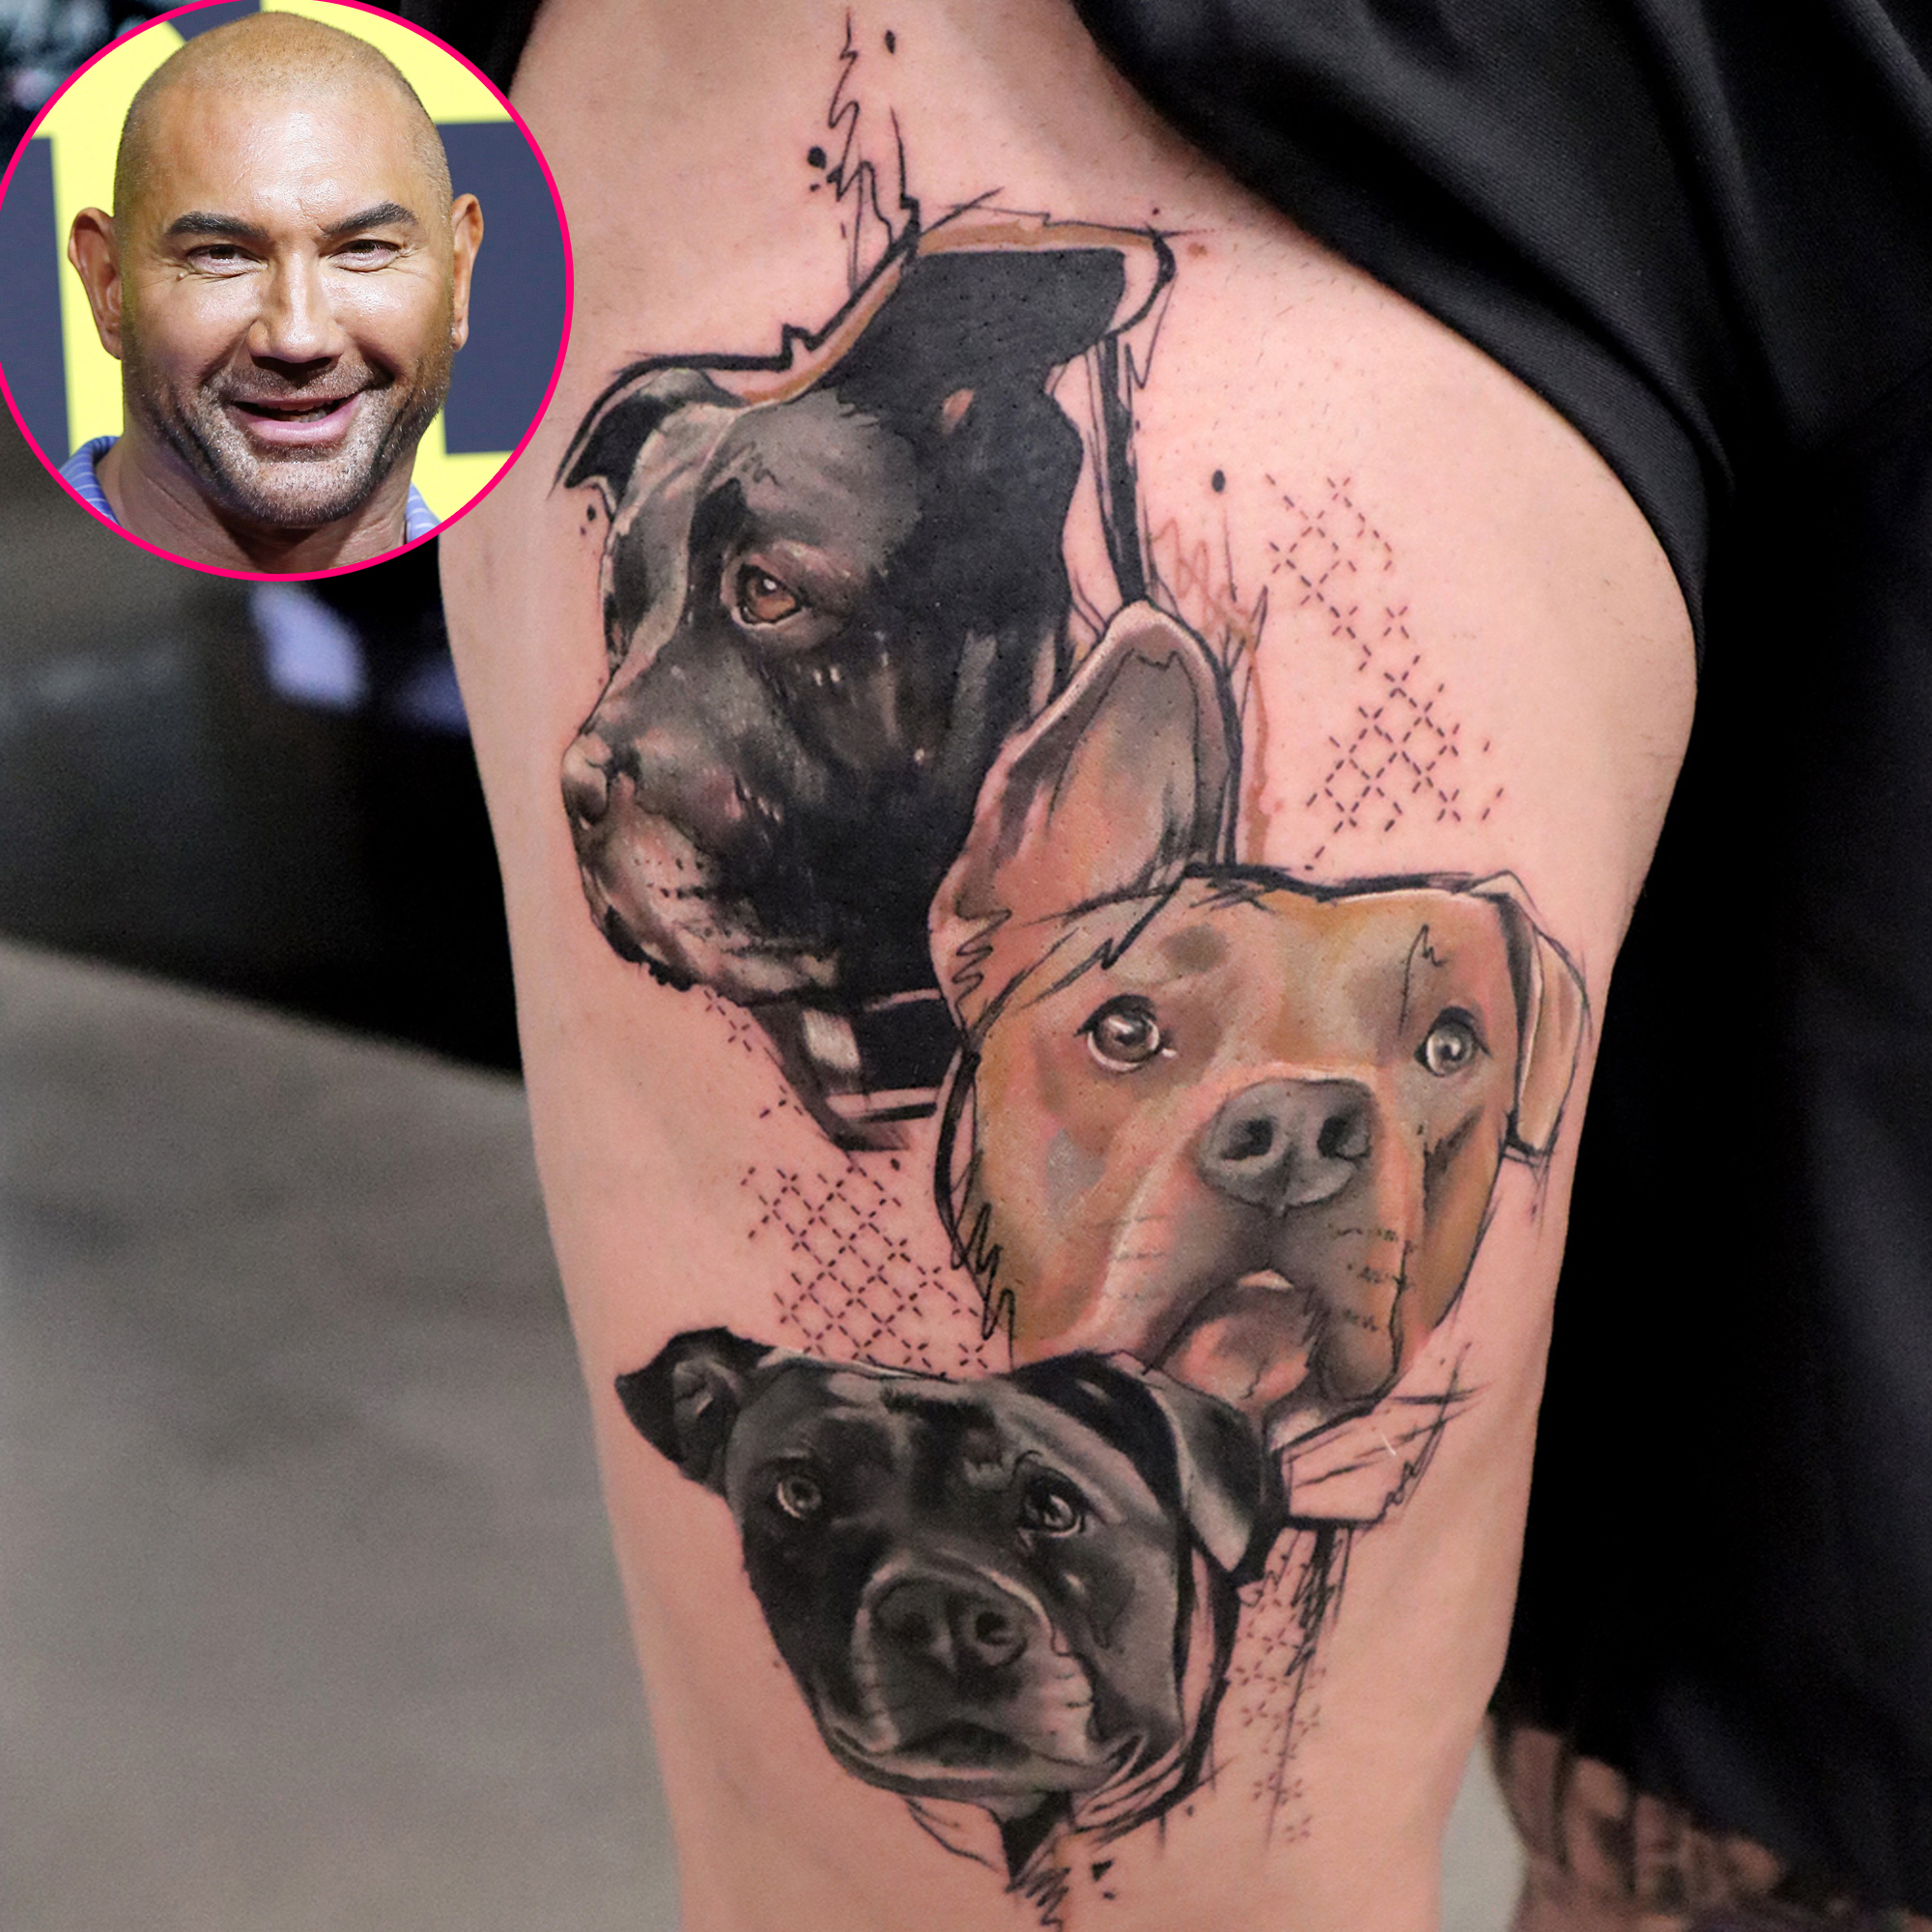 Man gets a tattoo of his dogs paw and name Watch heartening video   Trending  Hindustan Times